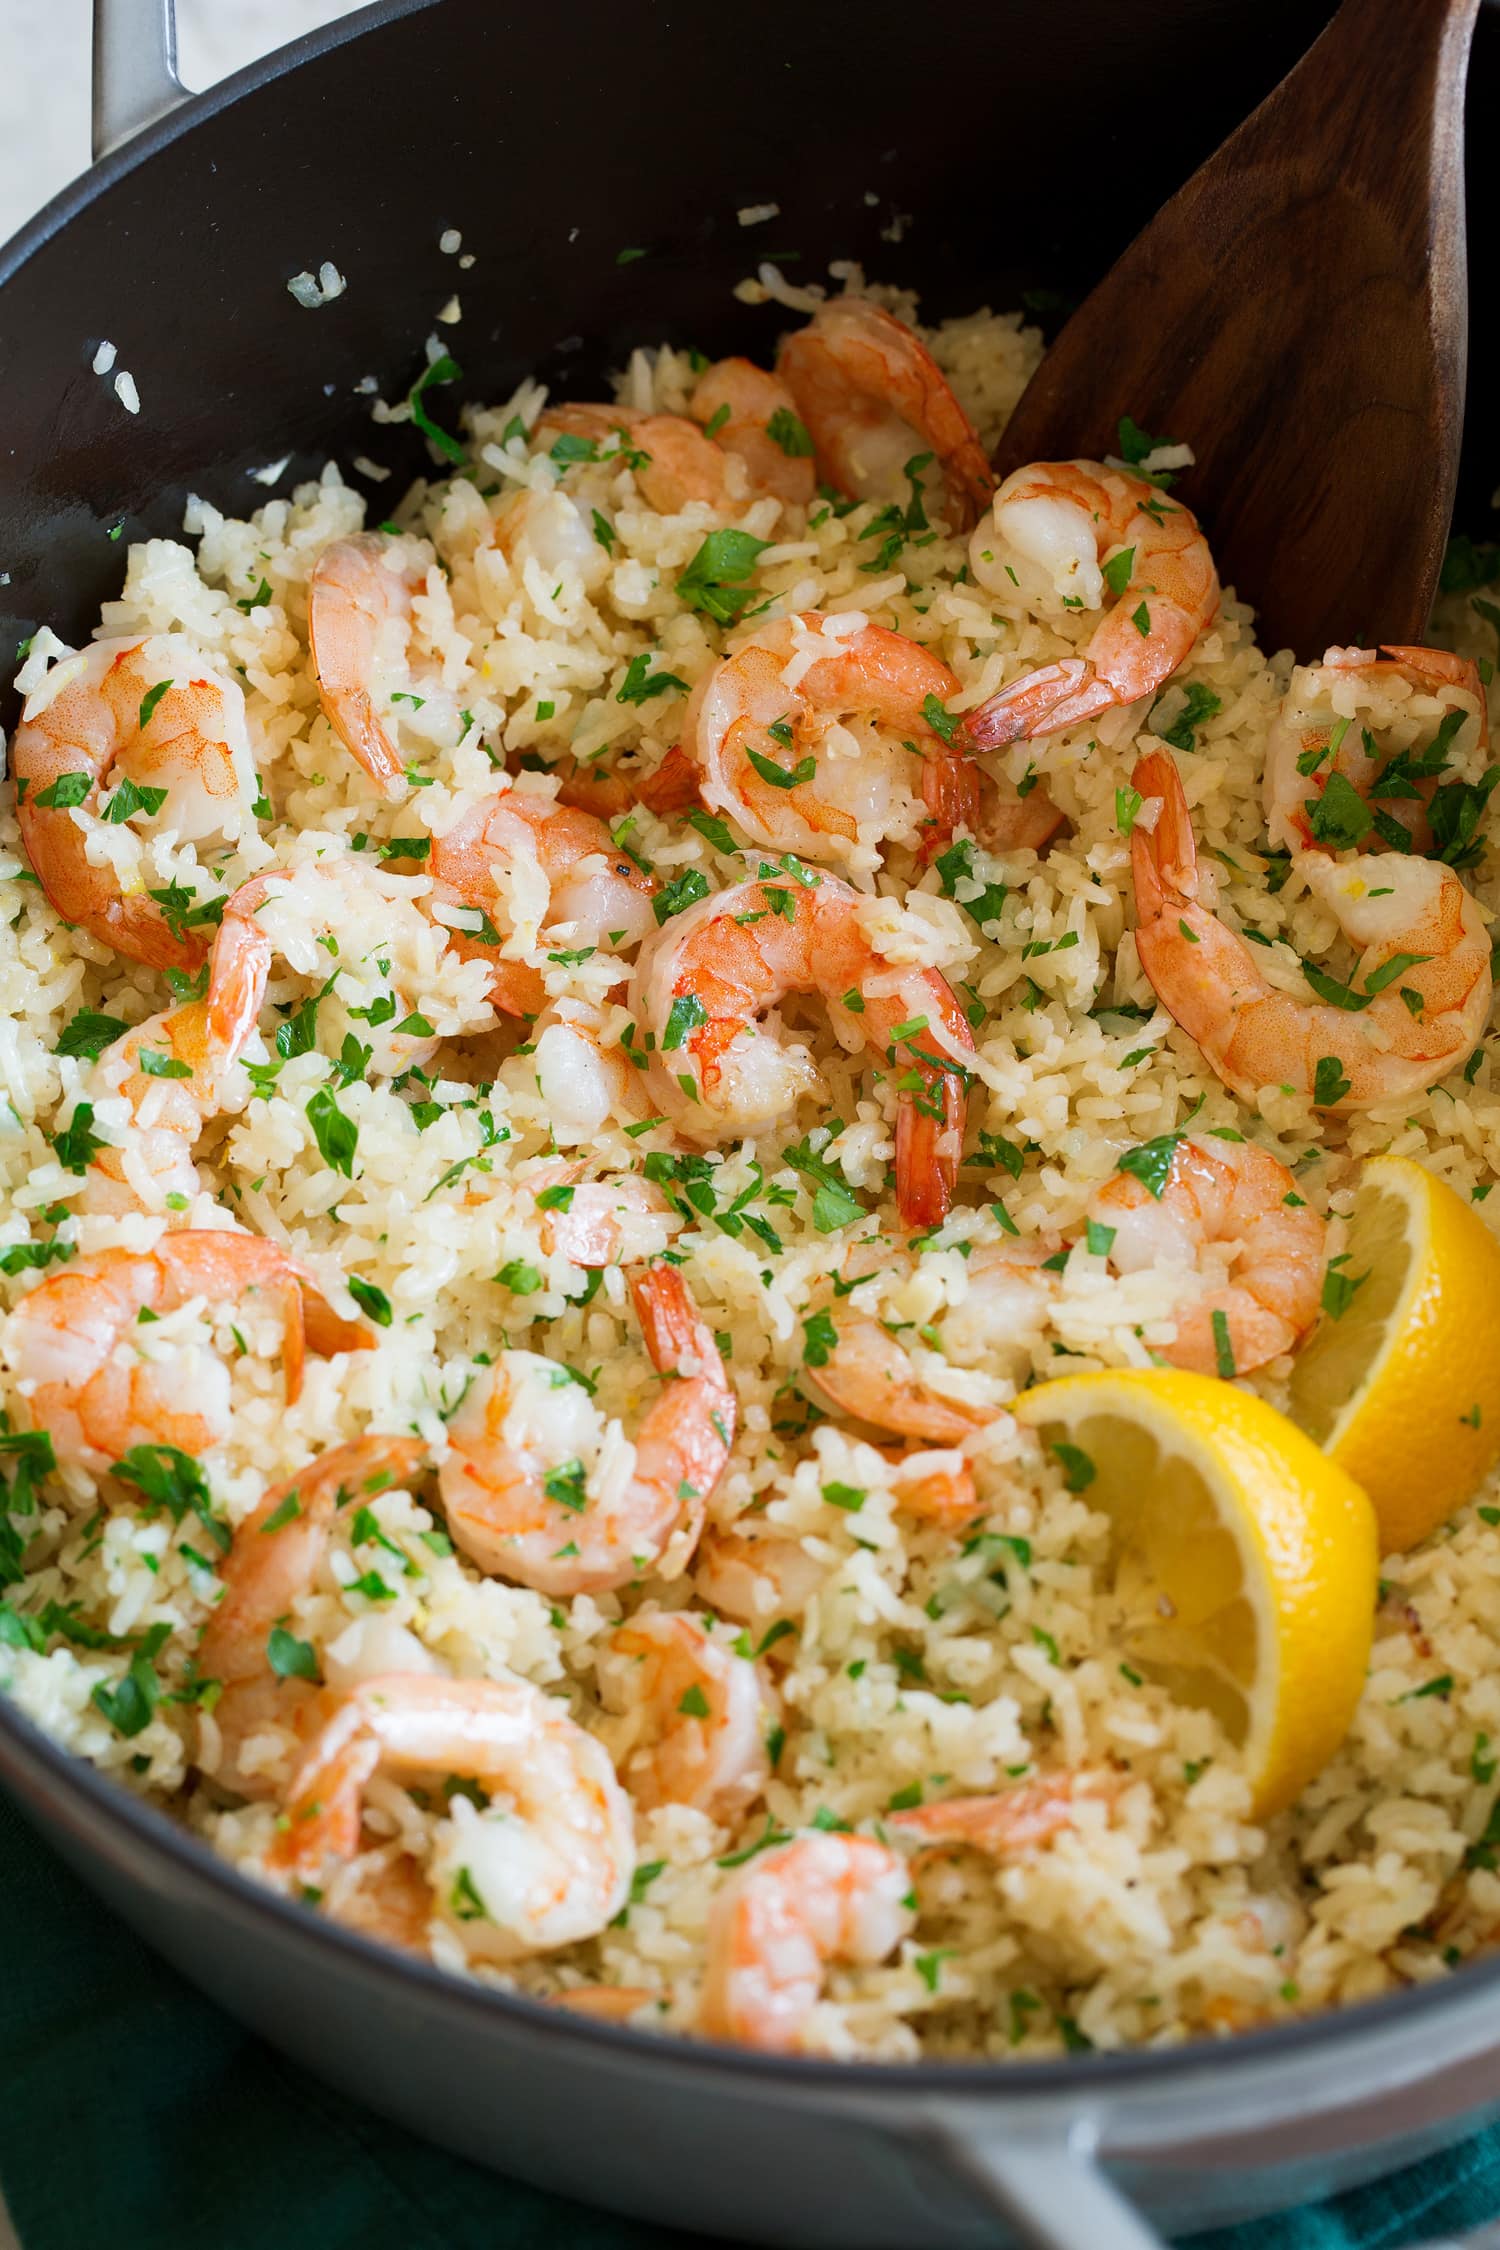 Shrimp and rice shown in a large pot.